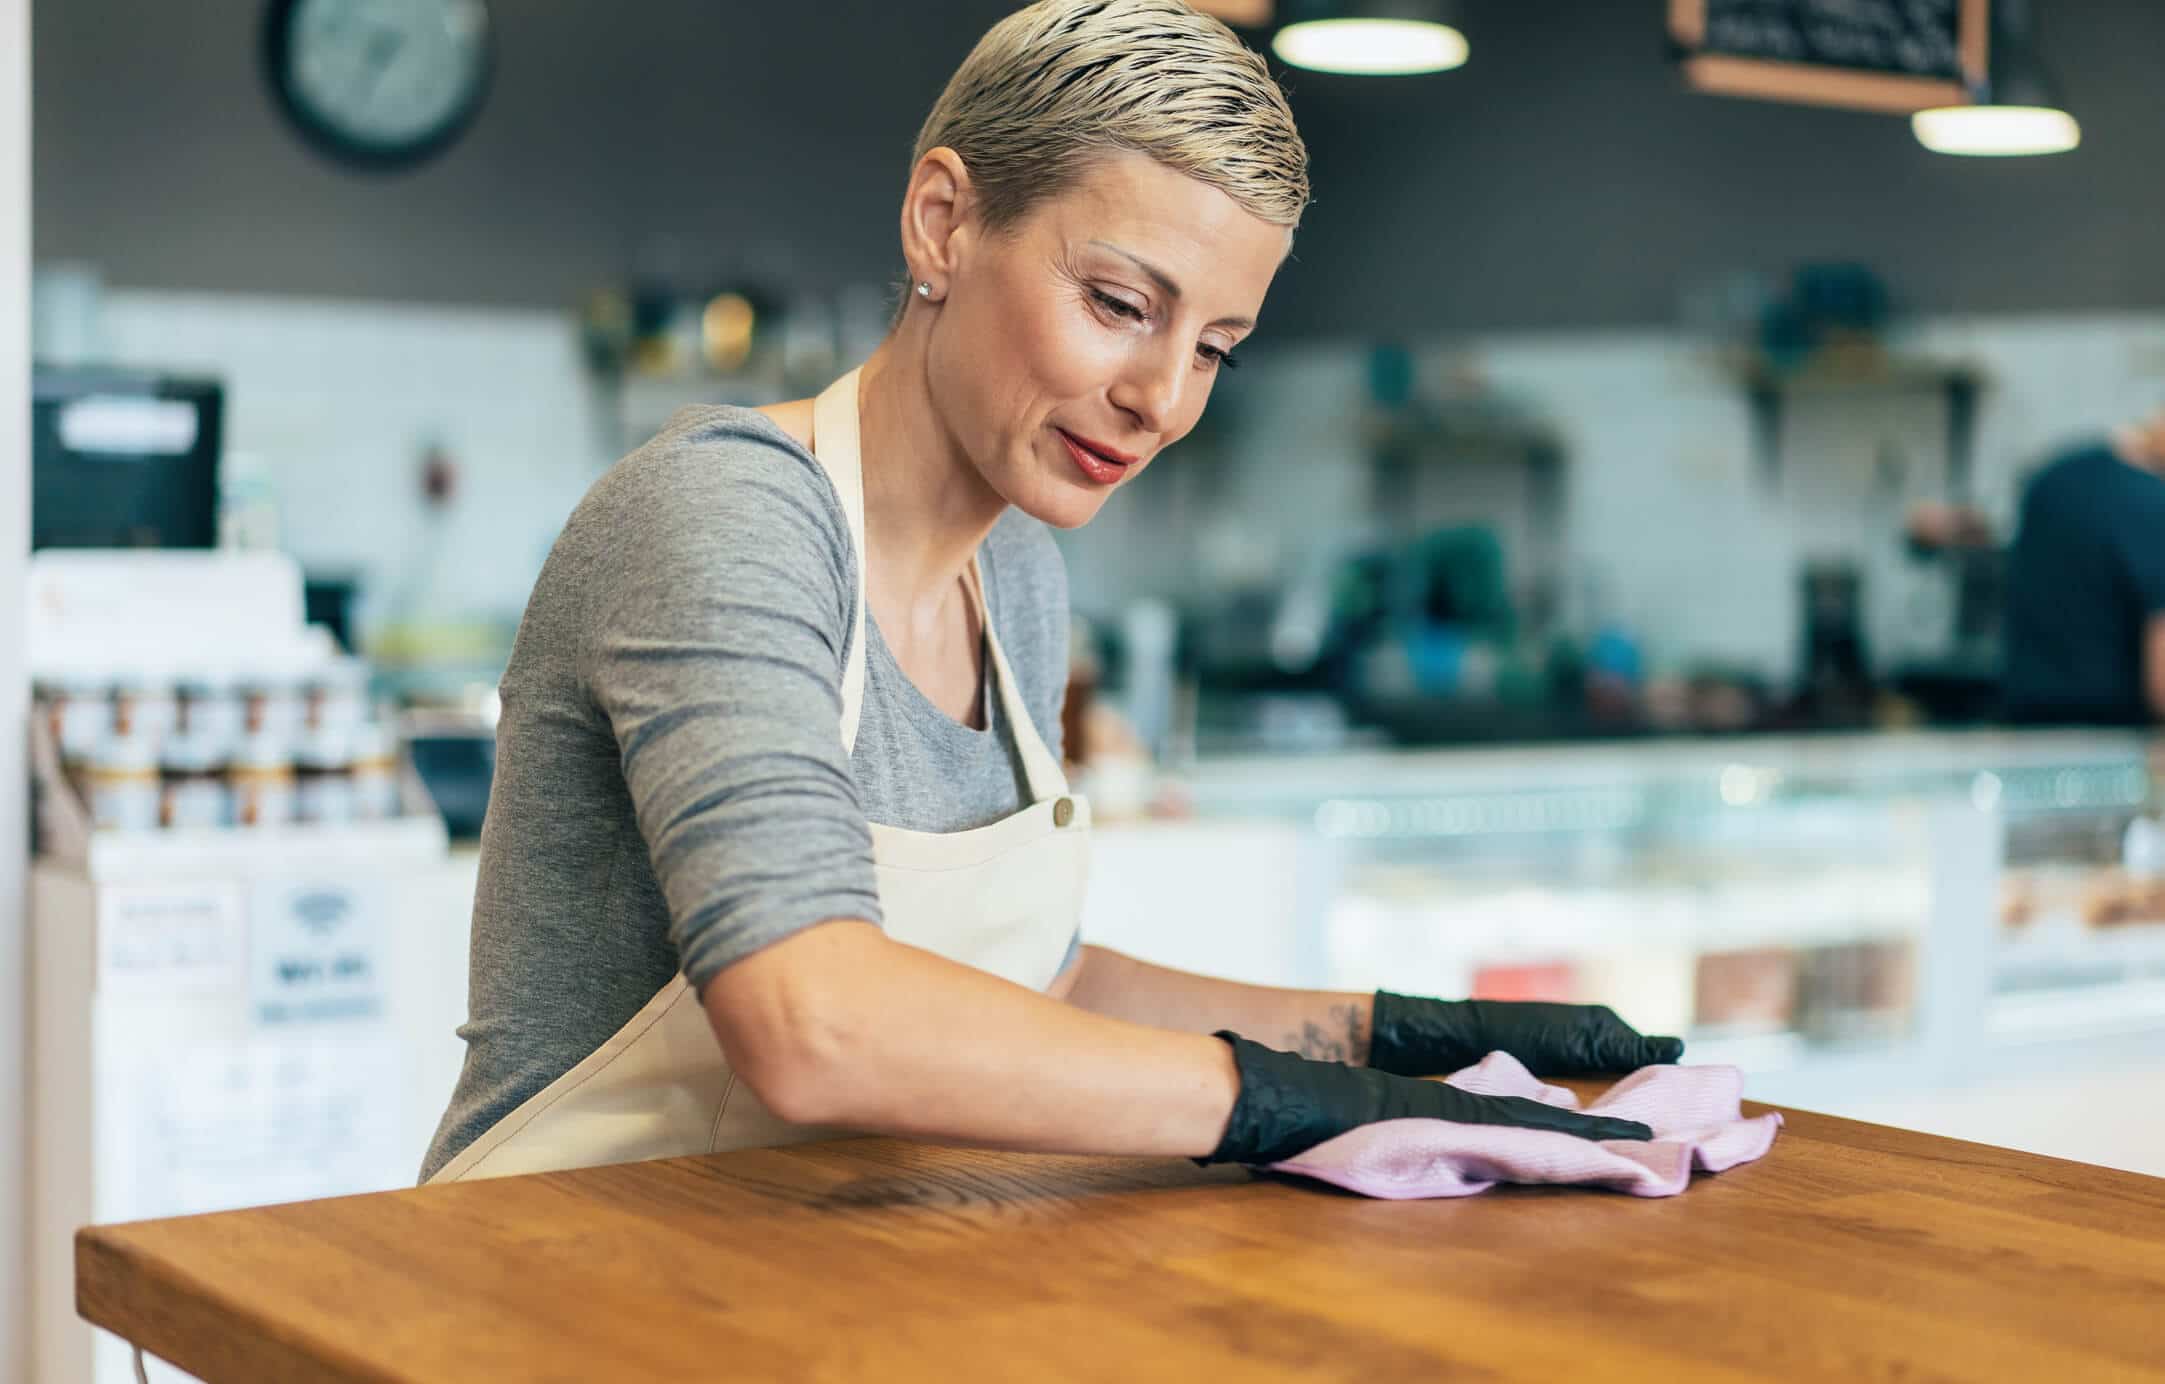 Woman cleaning with spray disinfectant and gloves in cafe